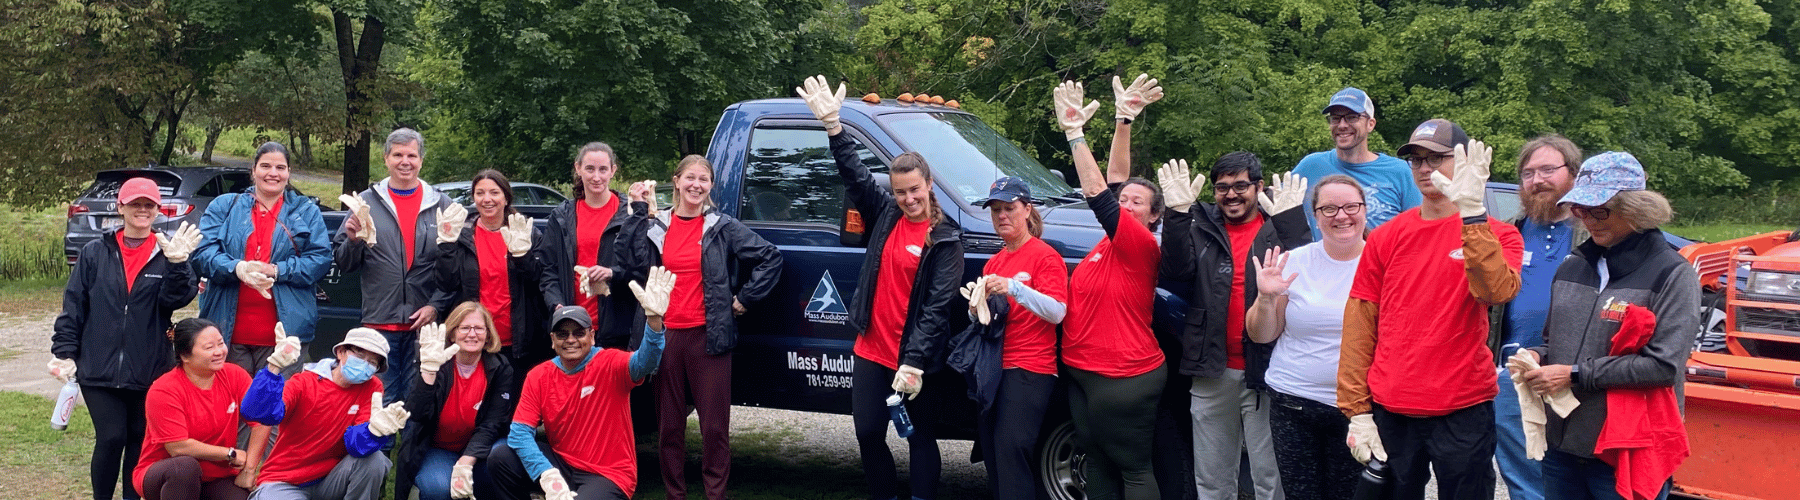 Corporate volunteers at an outdoor environmental conservation project.